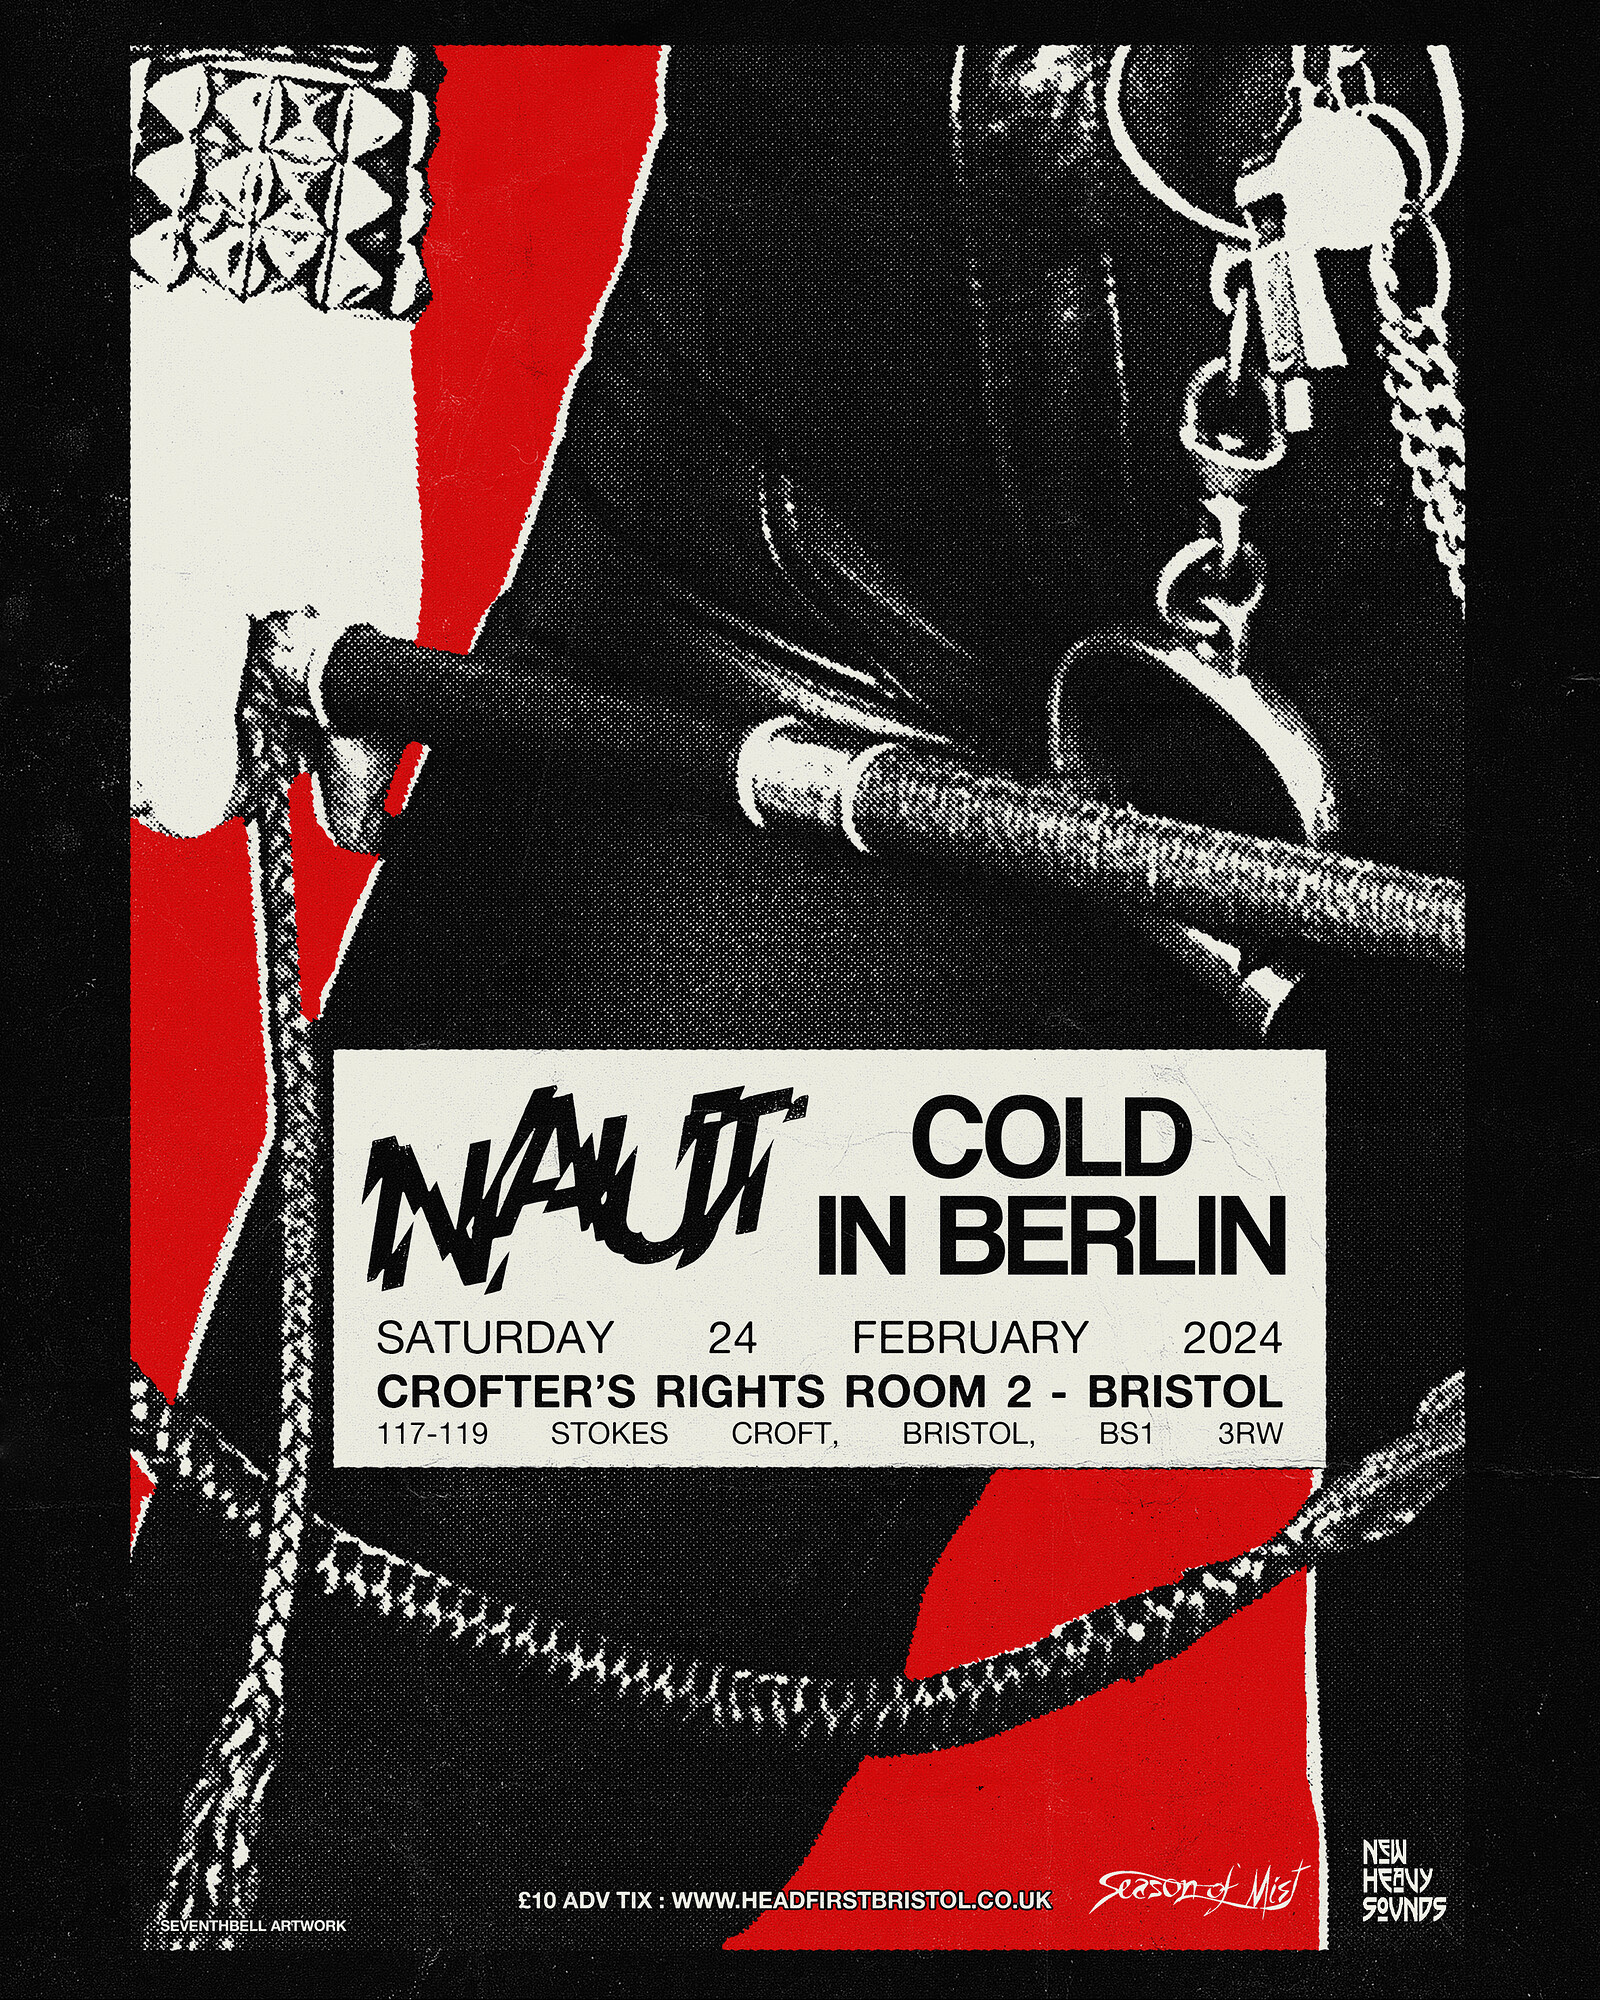 NAUT with Cold in Berlin + support from Bruxism at Crofters Rights